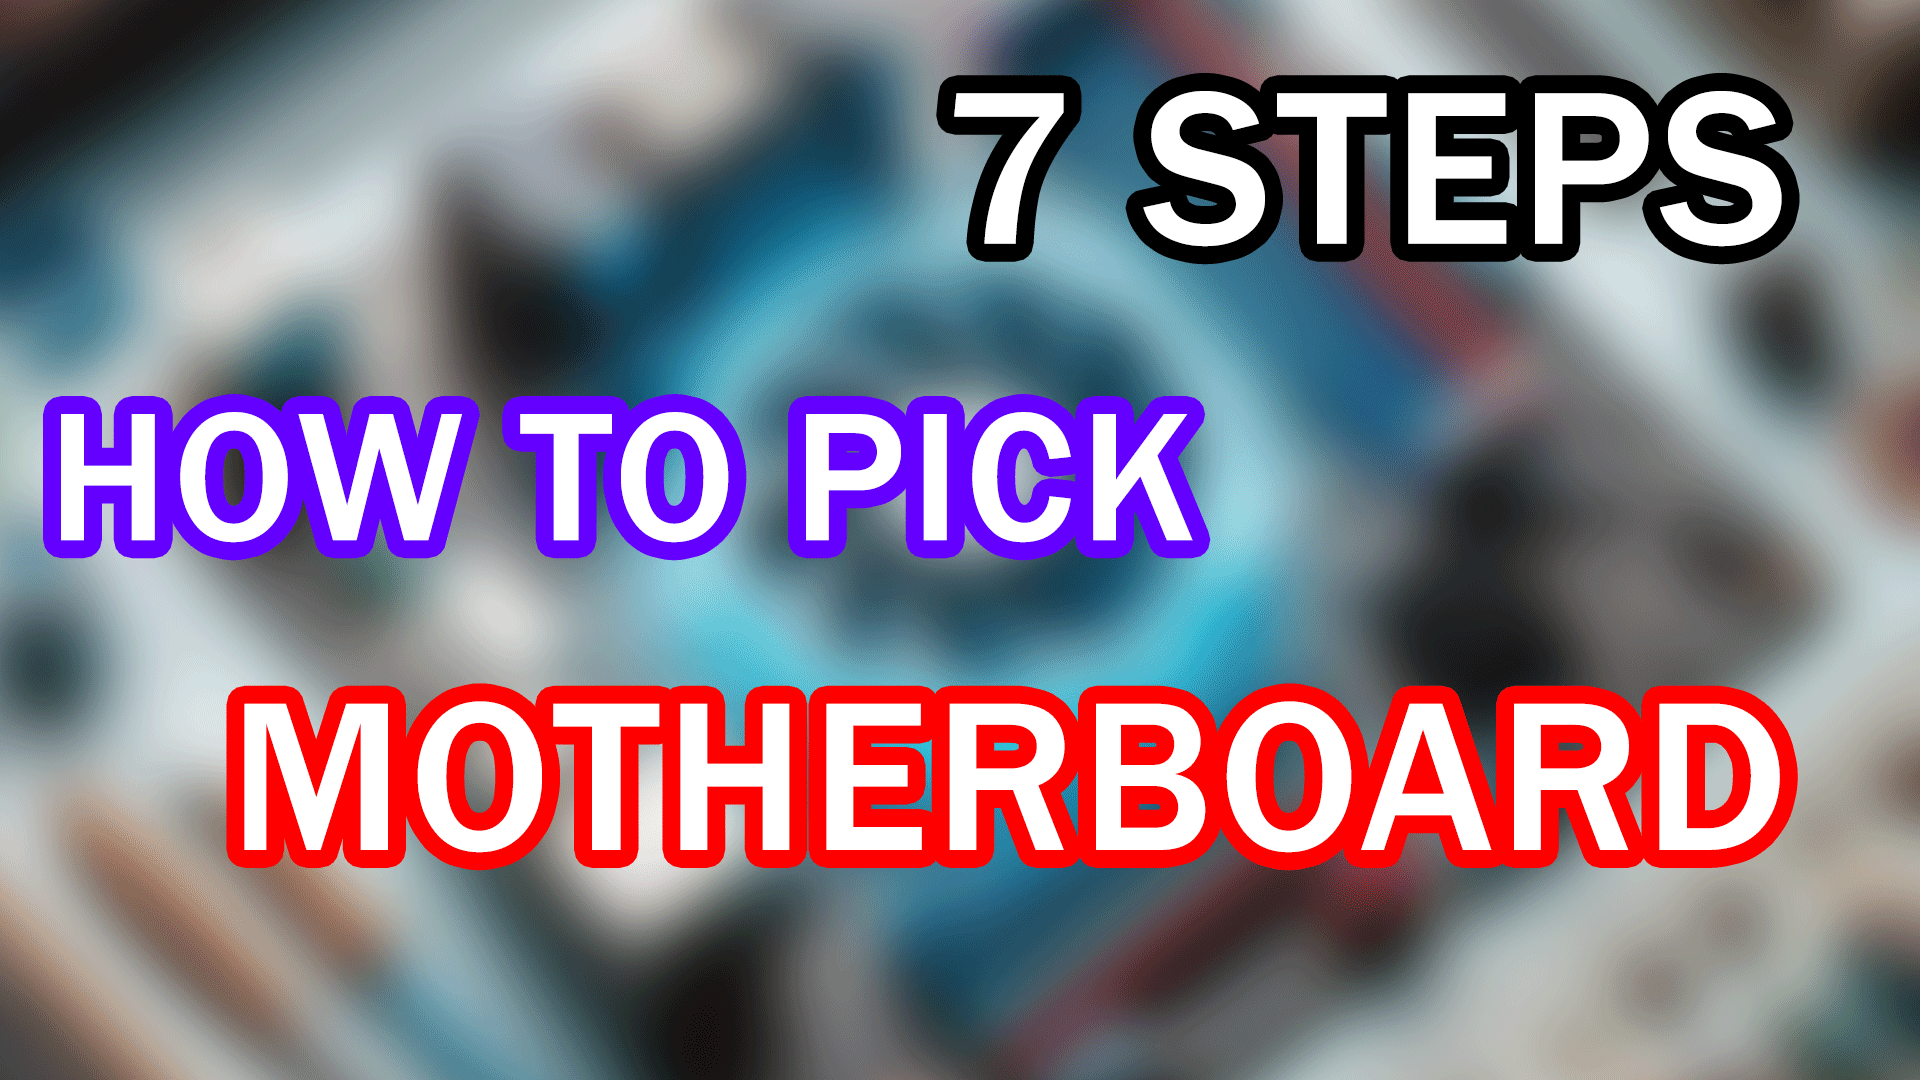 7 Steps to chose a Right Motherboard for your PC